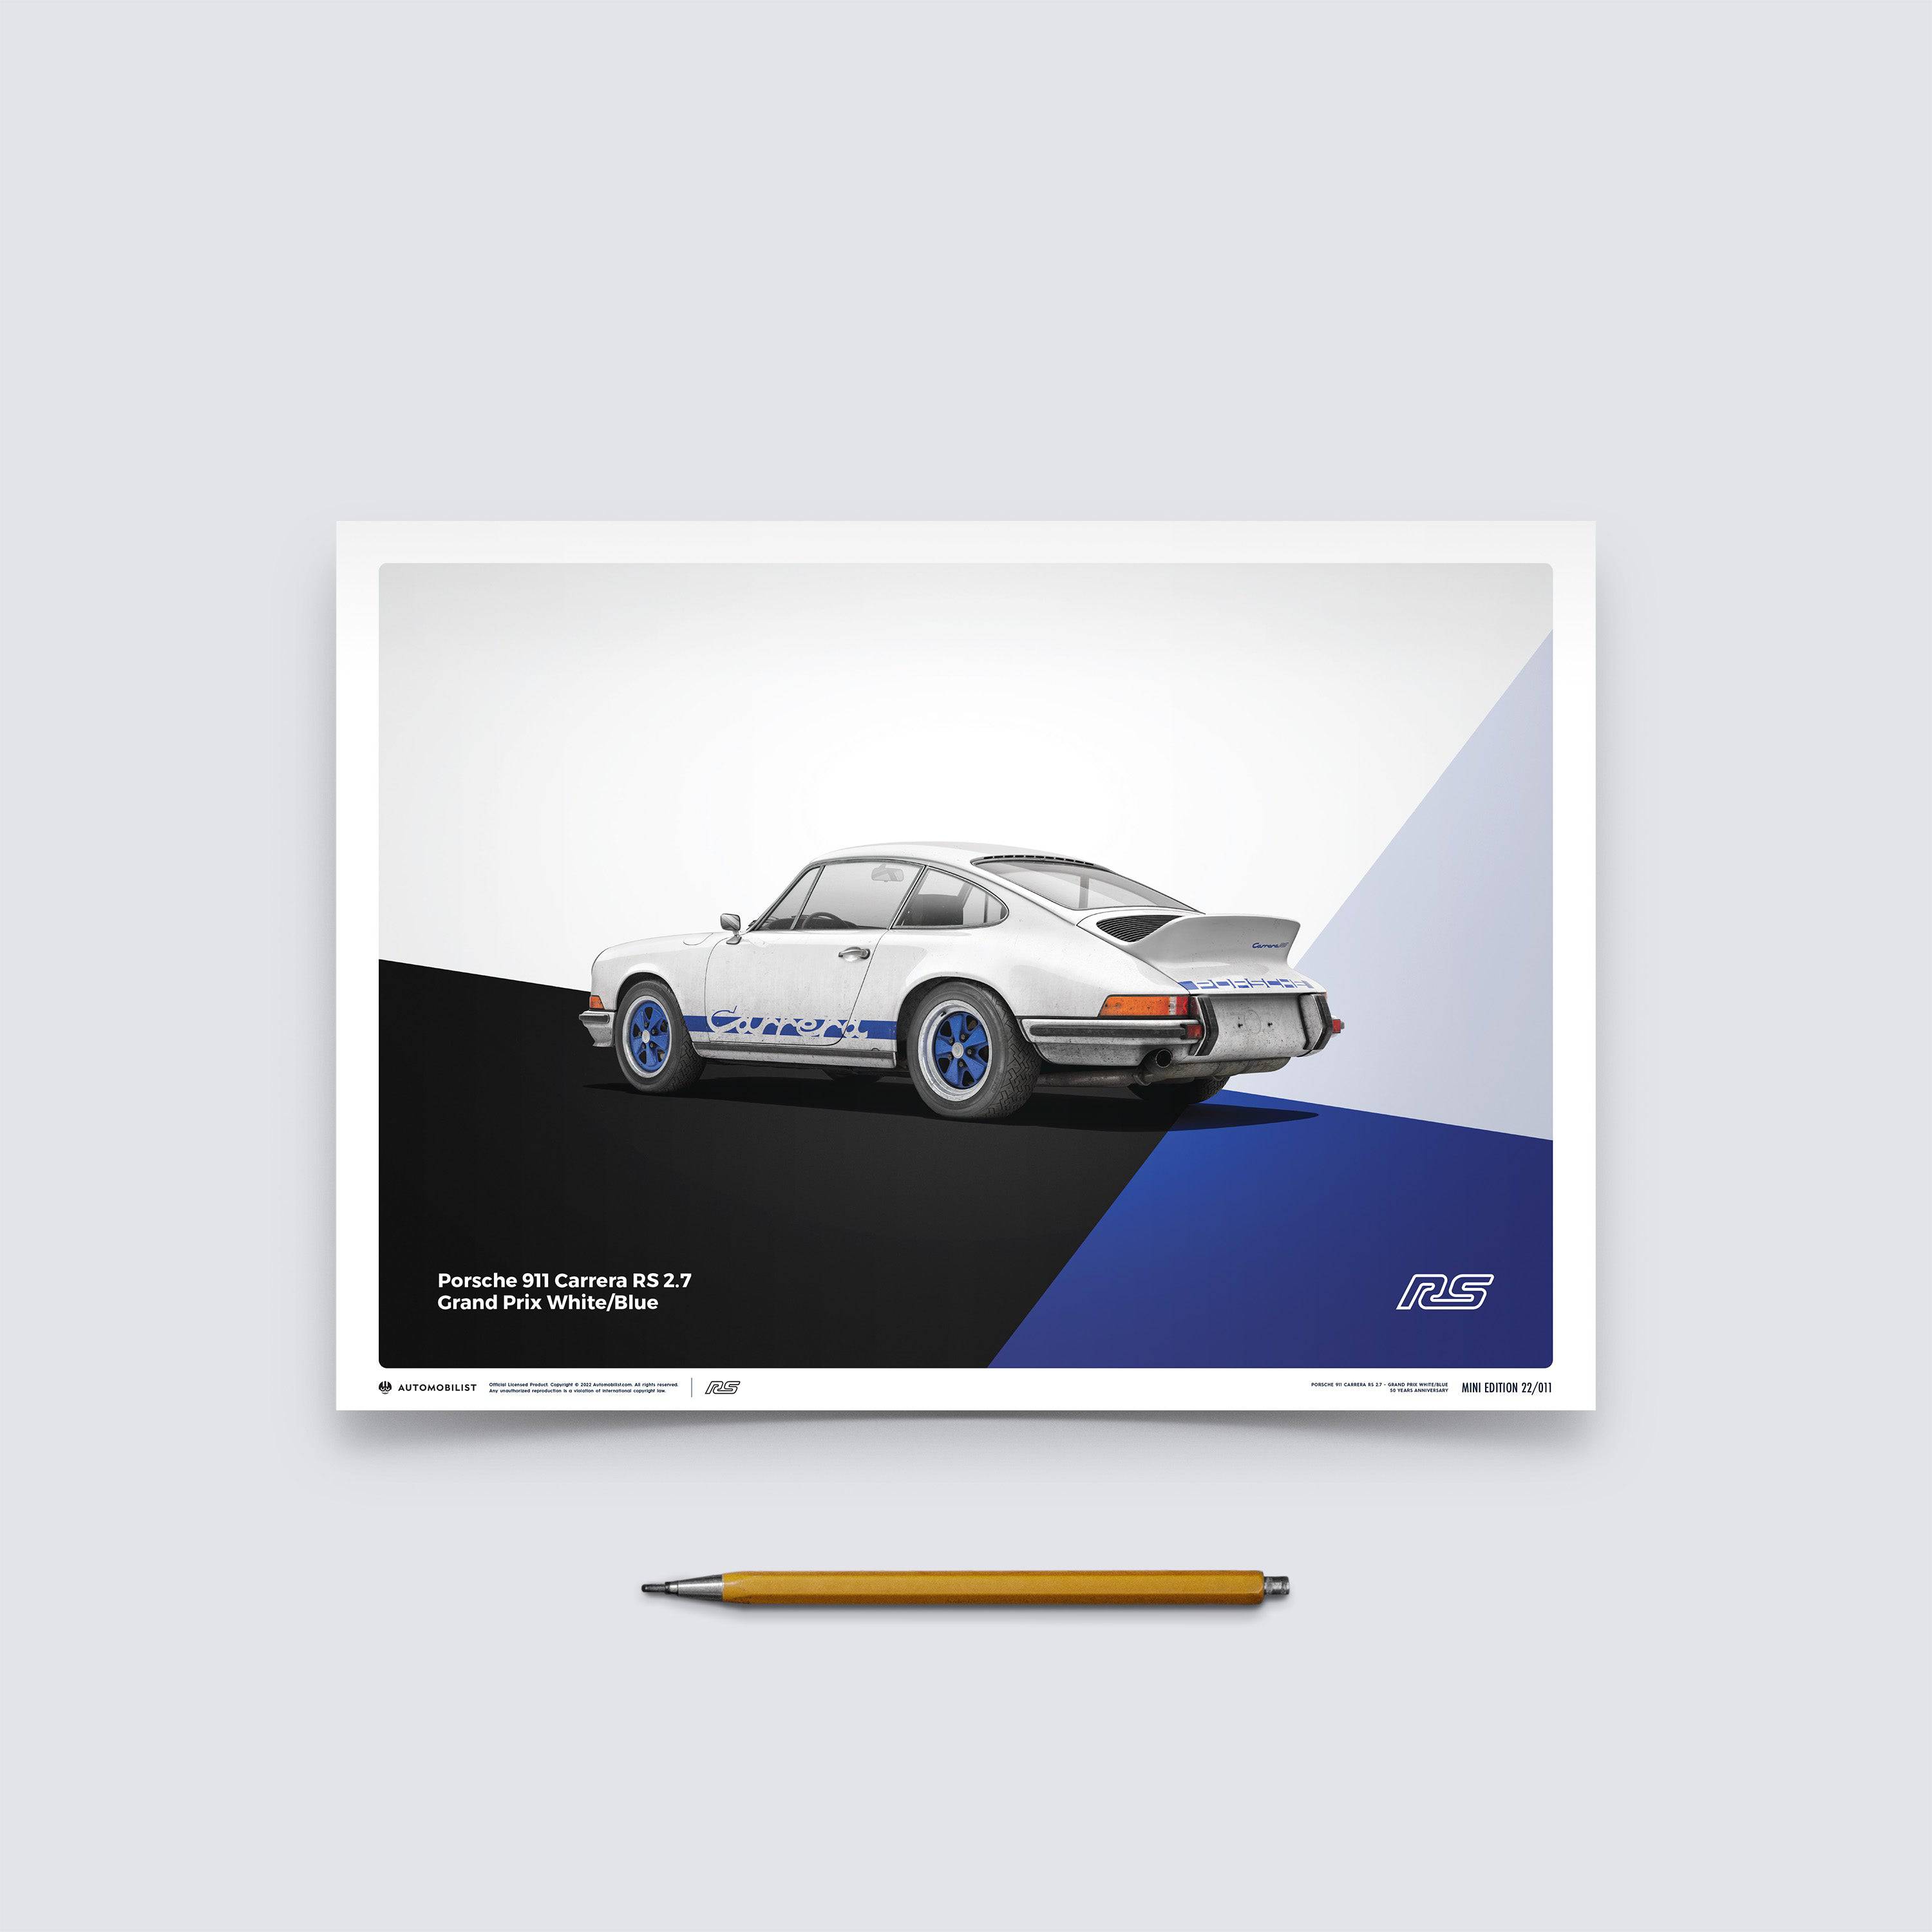 Limited Edition Car: Over 917 Royalty-Free Licensable Stock Illustrations &  Drawings